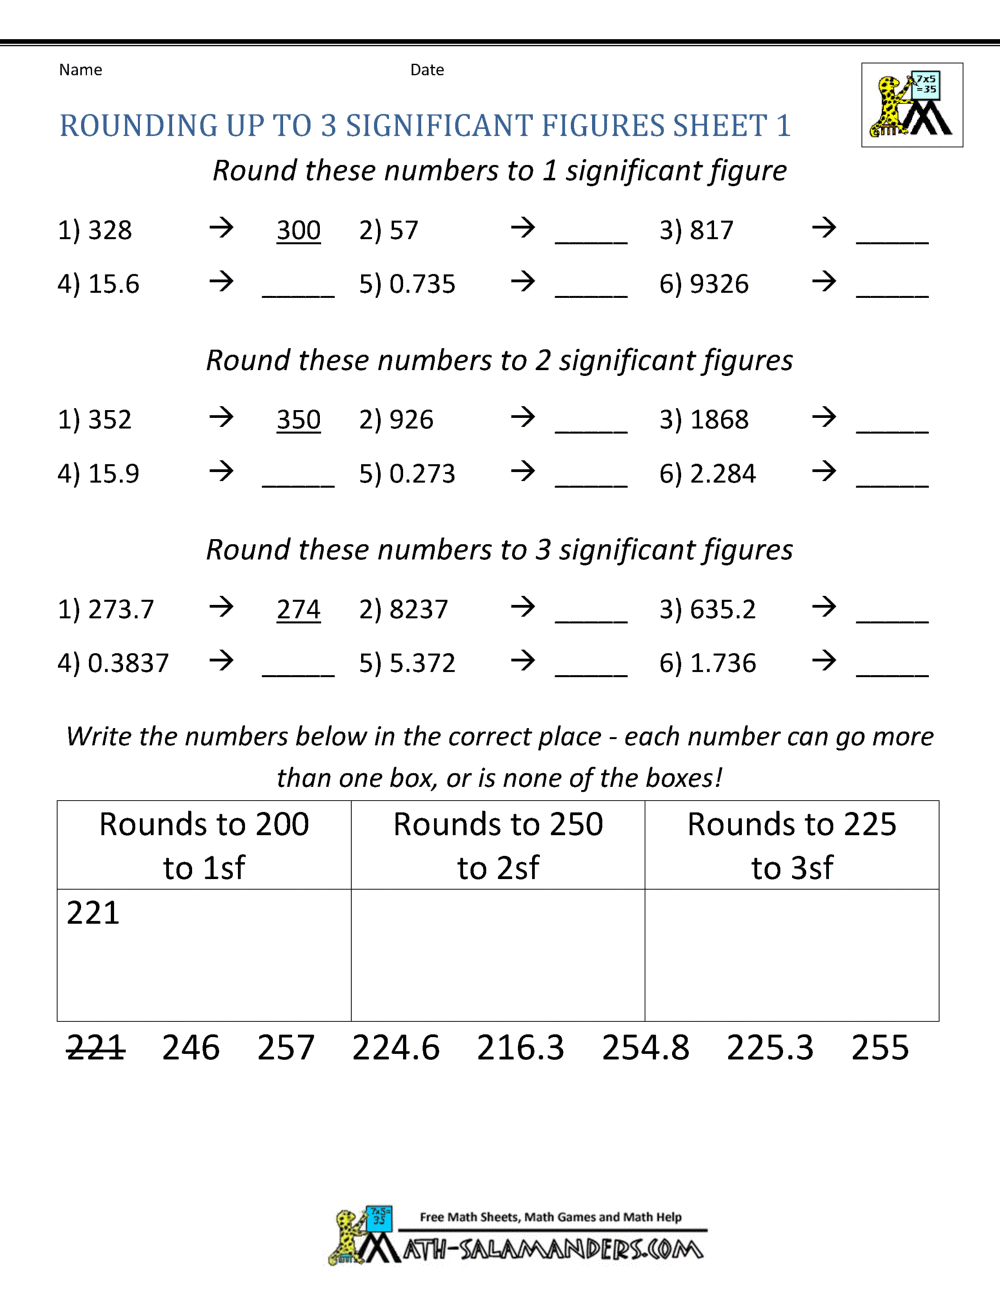 Rounding Significant Figures For Significant Figures Practice Worksheet